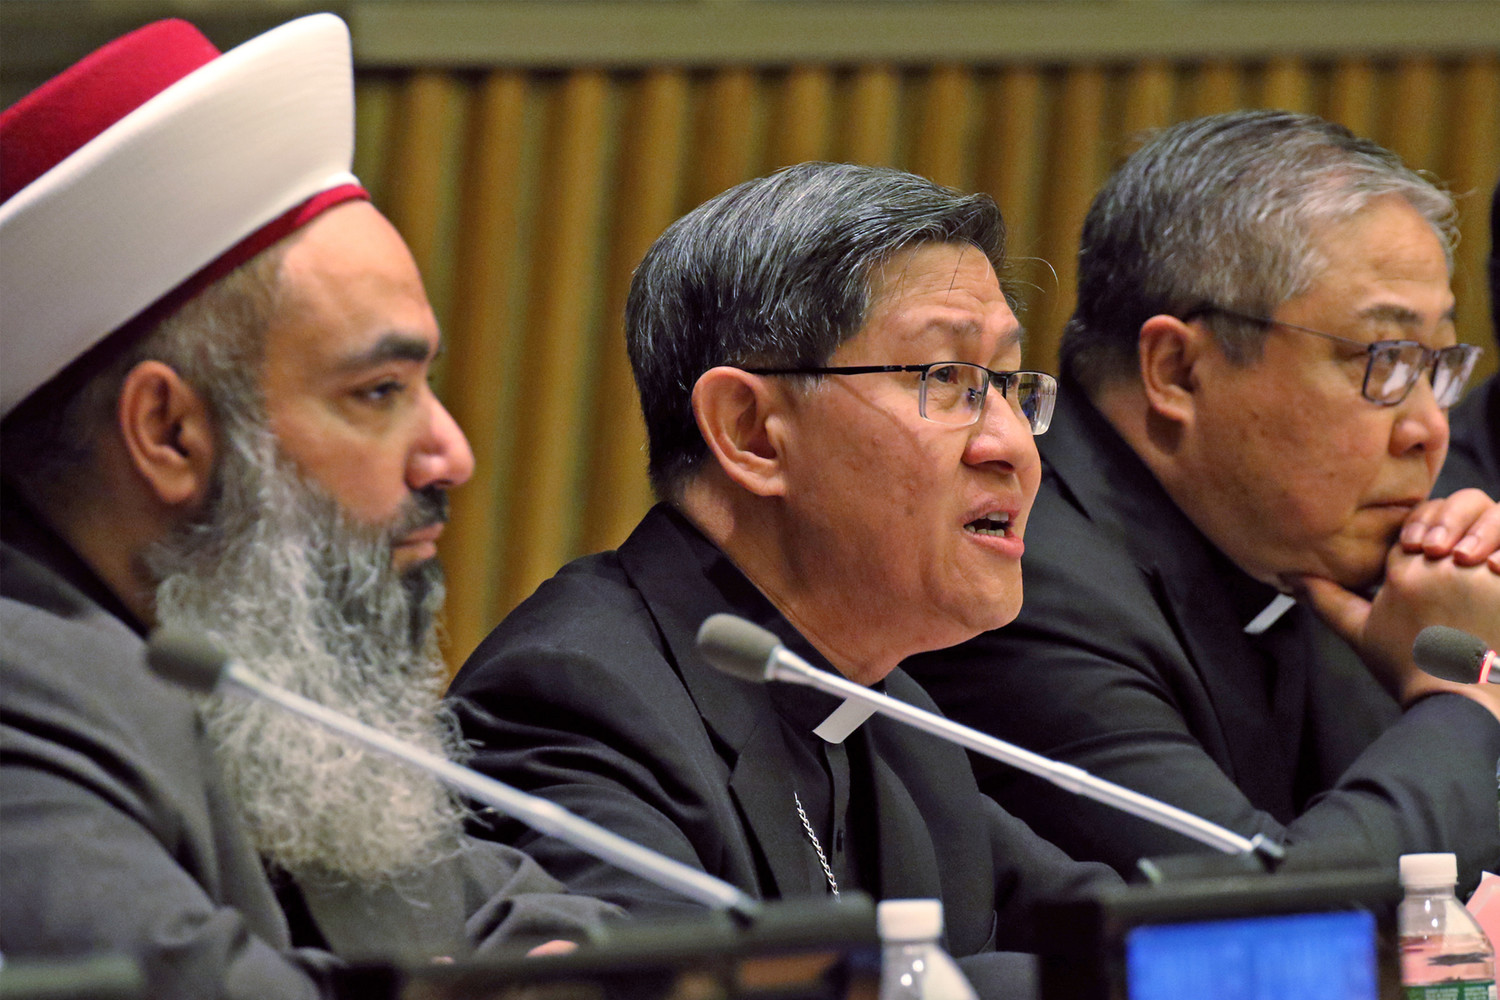 Cardinal Luis Antonio Tagle of Manila, Philippines, speaks during an interfaith conference on migrants and refugees at the U.N. headquarters in New York May 3. The event was co-hosted by the Permanent Mission of the Holy See to the U.N. and Caritas Internationalis.